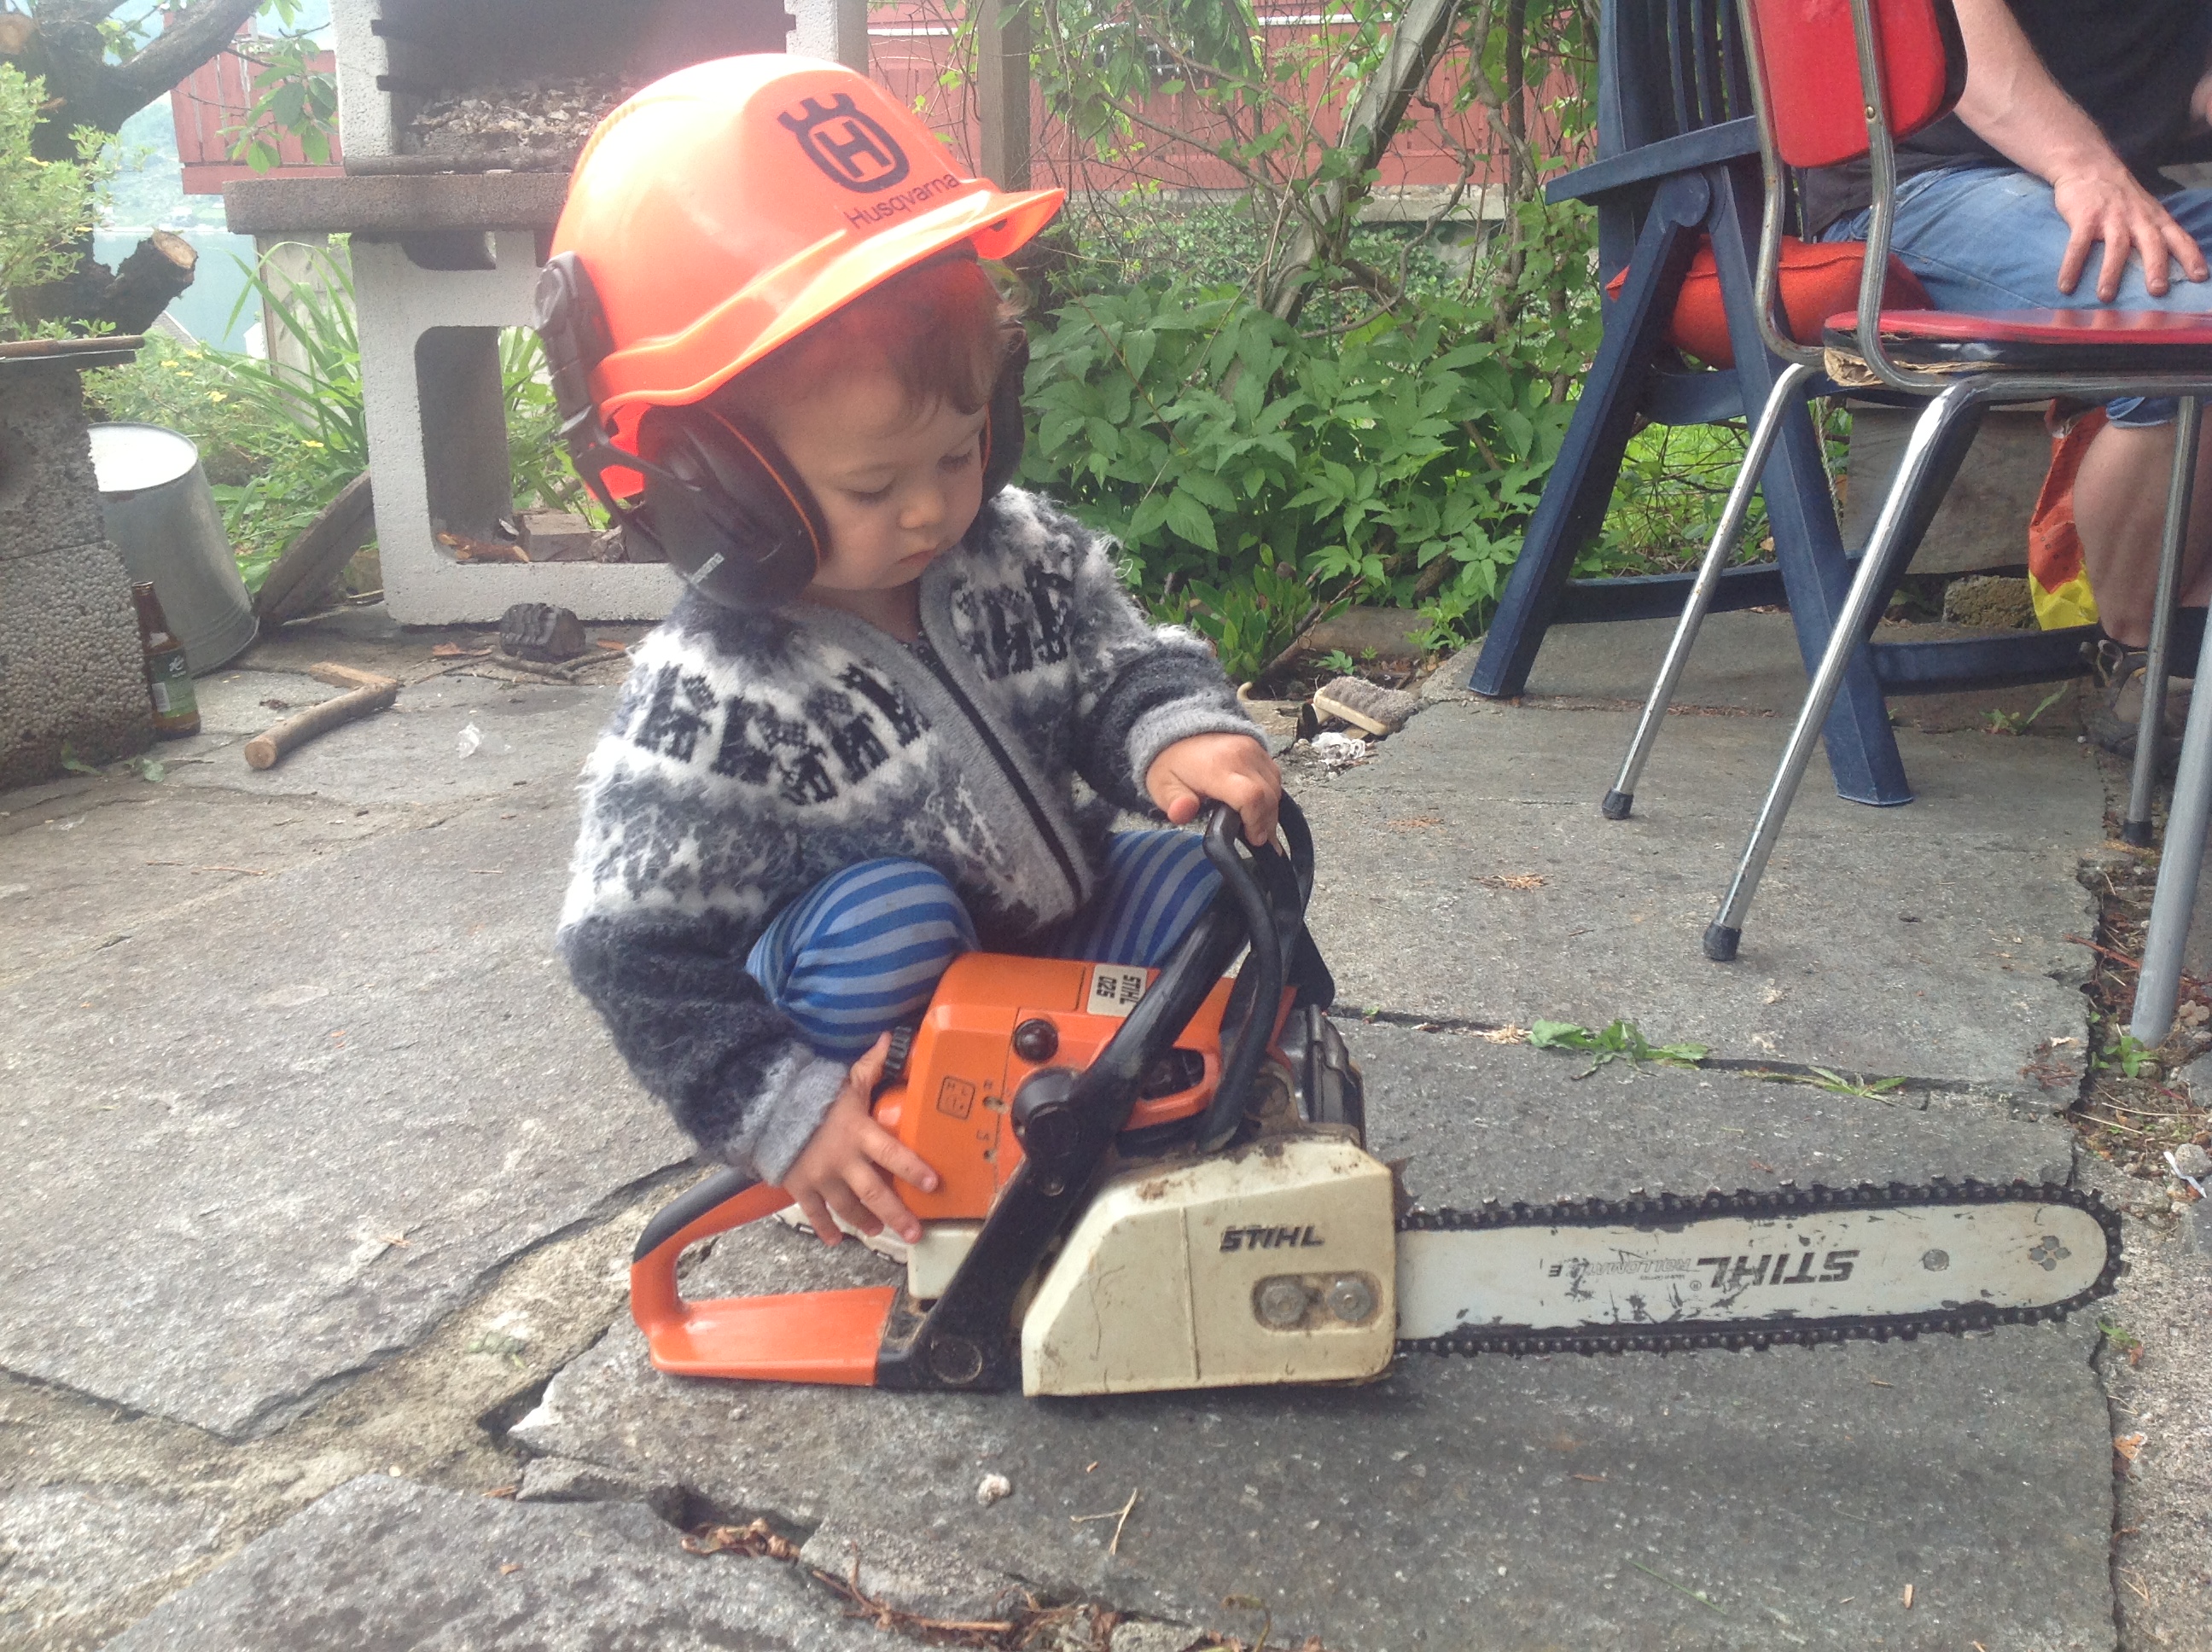 My son 2 years old with the chainsaw